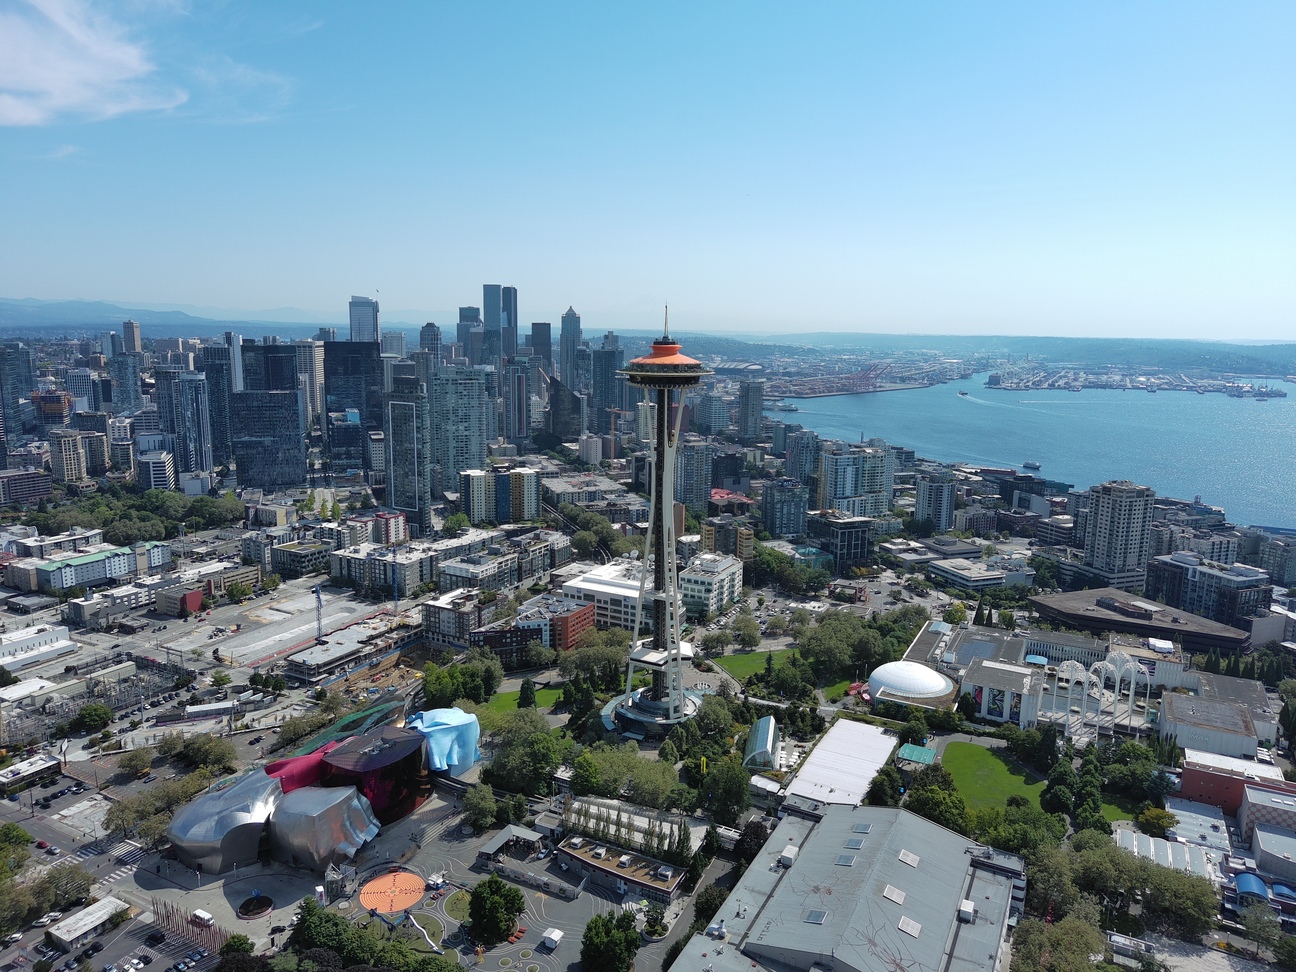 The Space Needle and Seattle skyline, seen from a bird's eye view